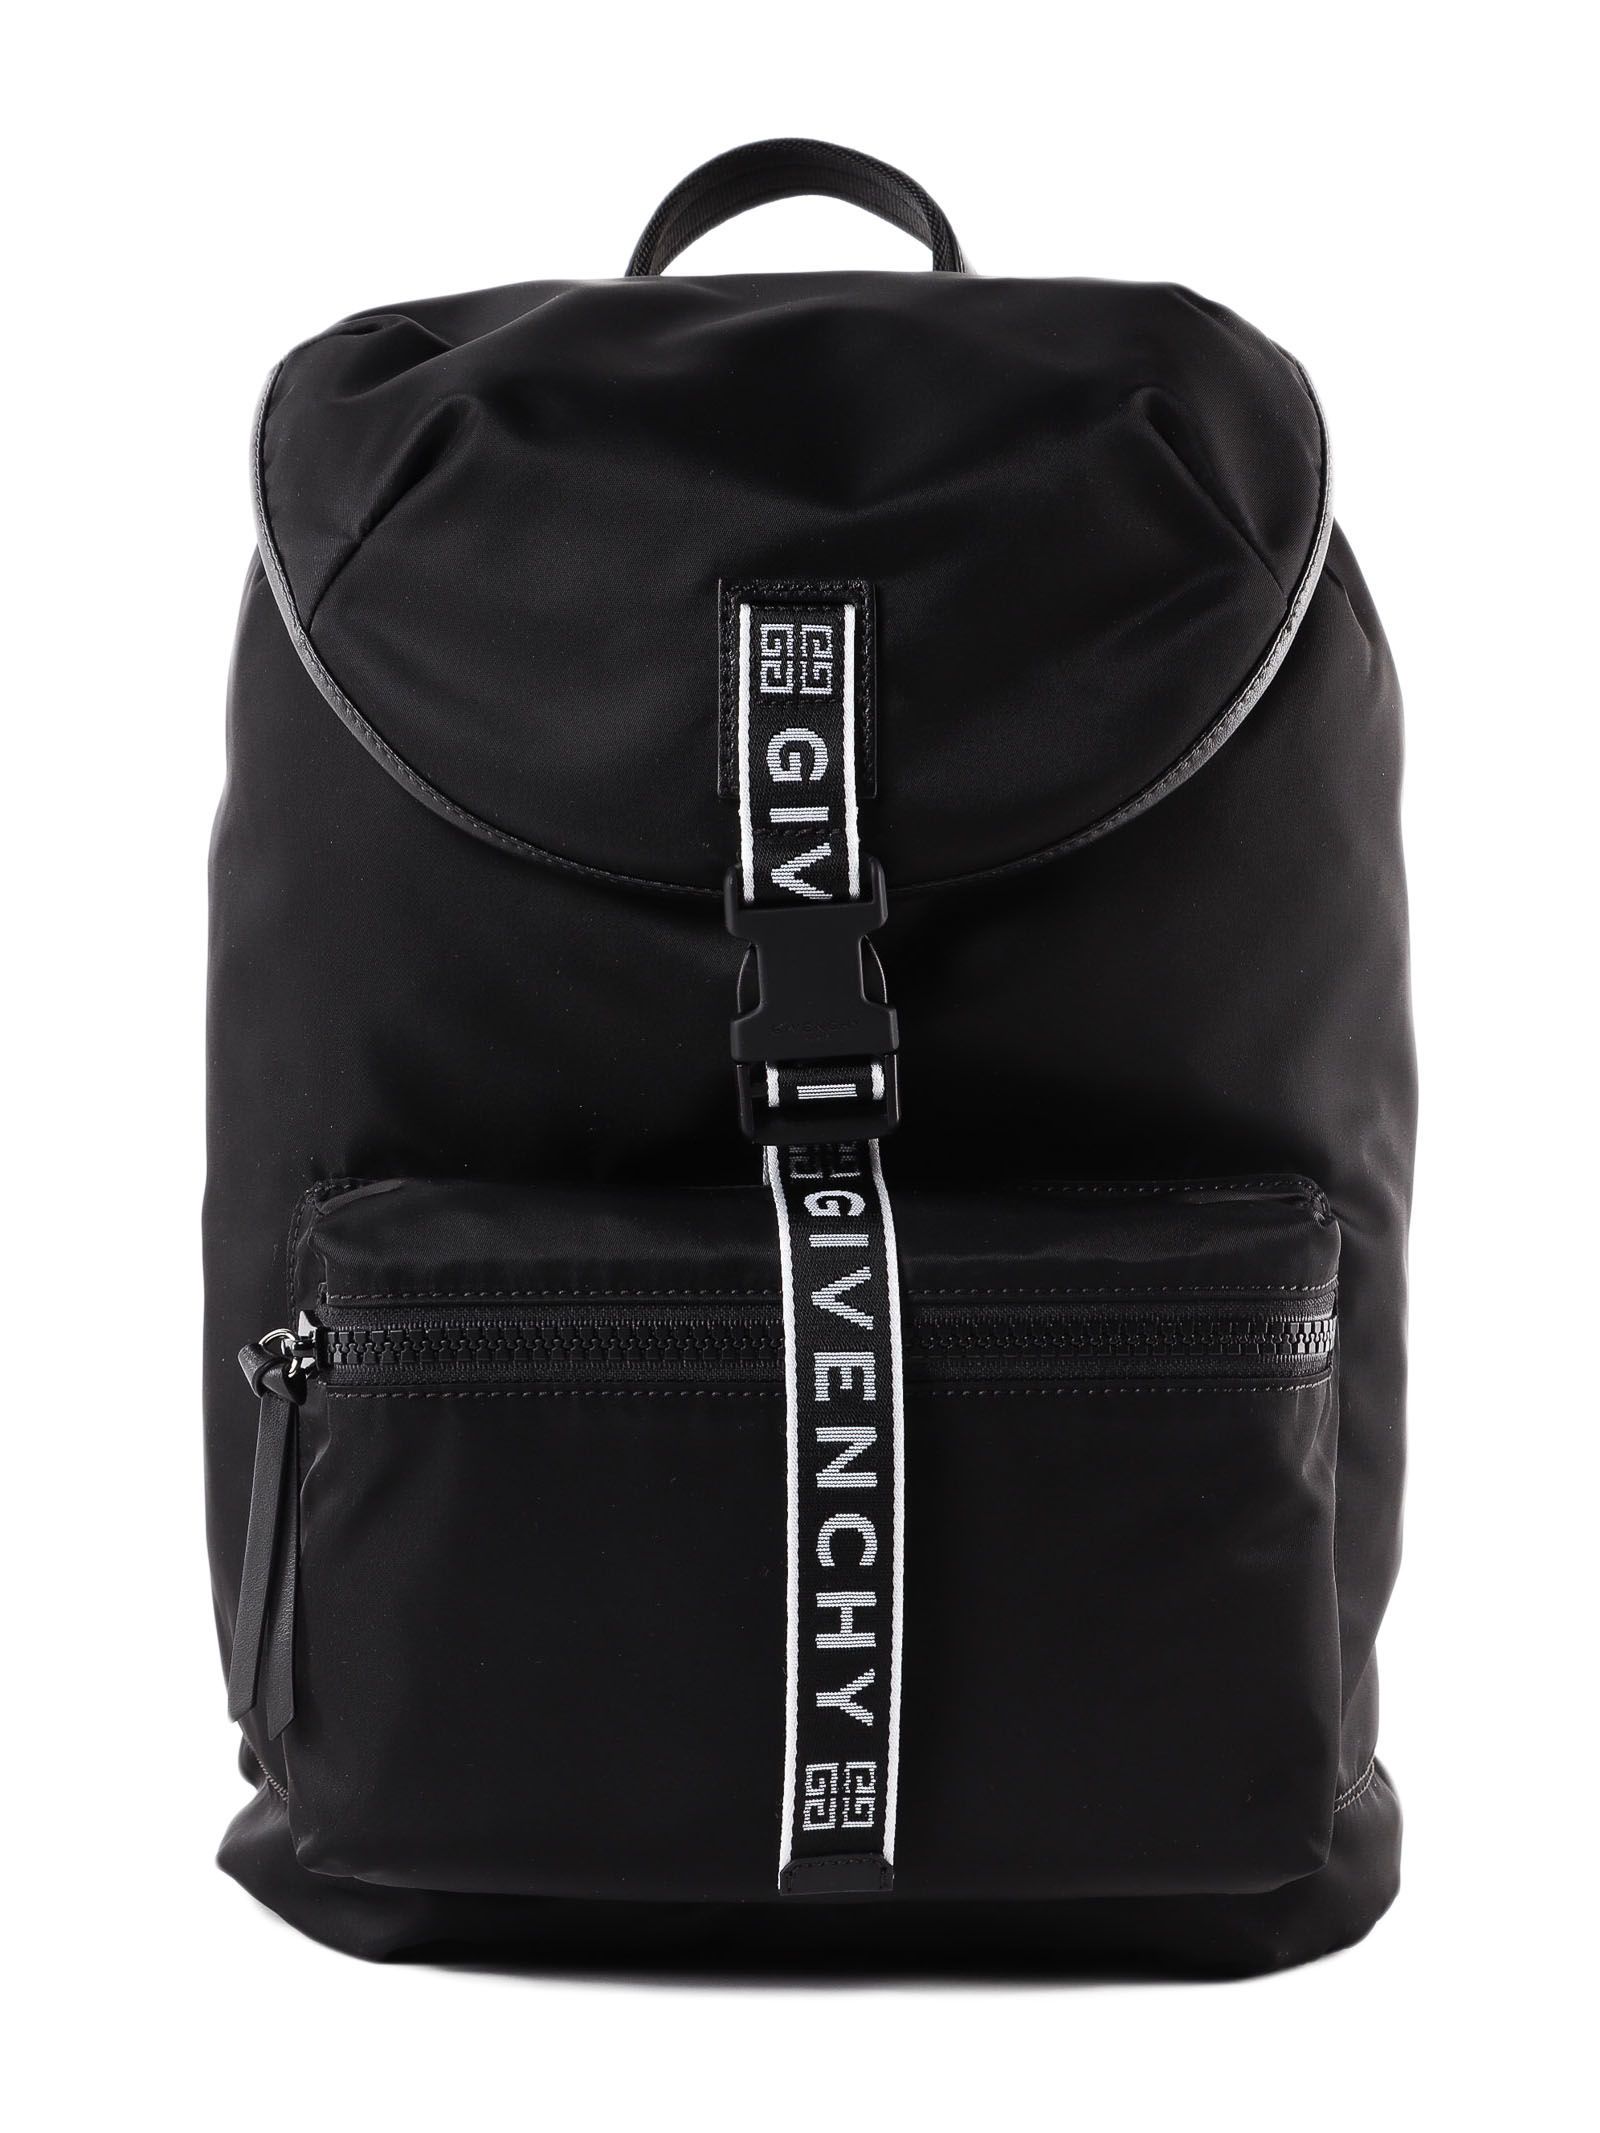 Givenchy Givenchy Light 3 Backpack - Black/white - 10791154 | italist